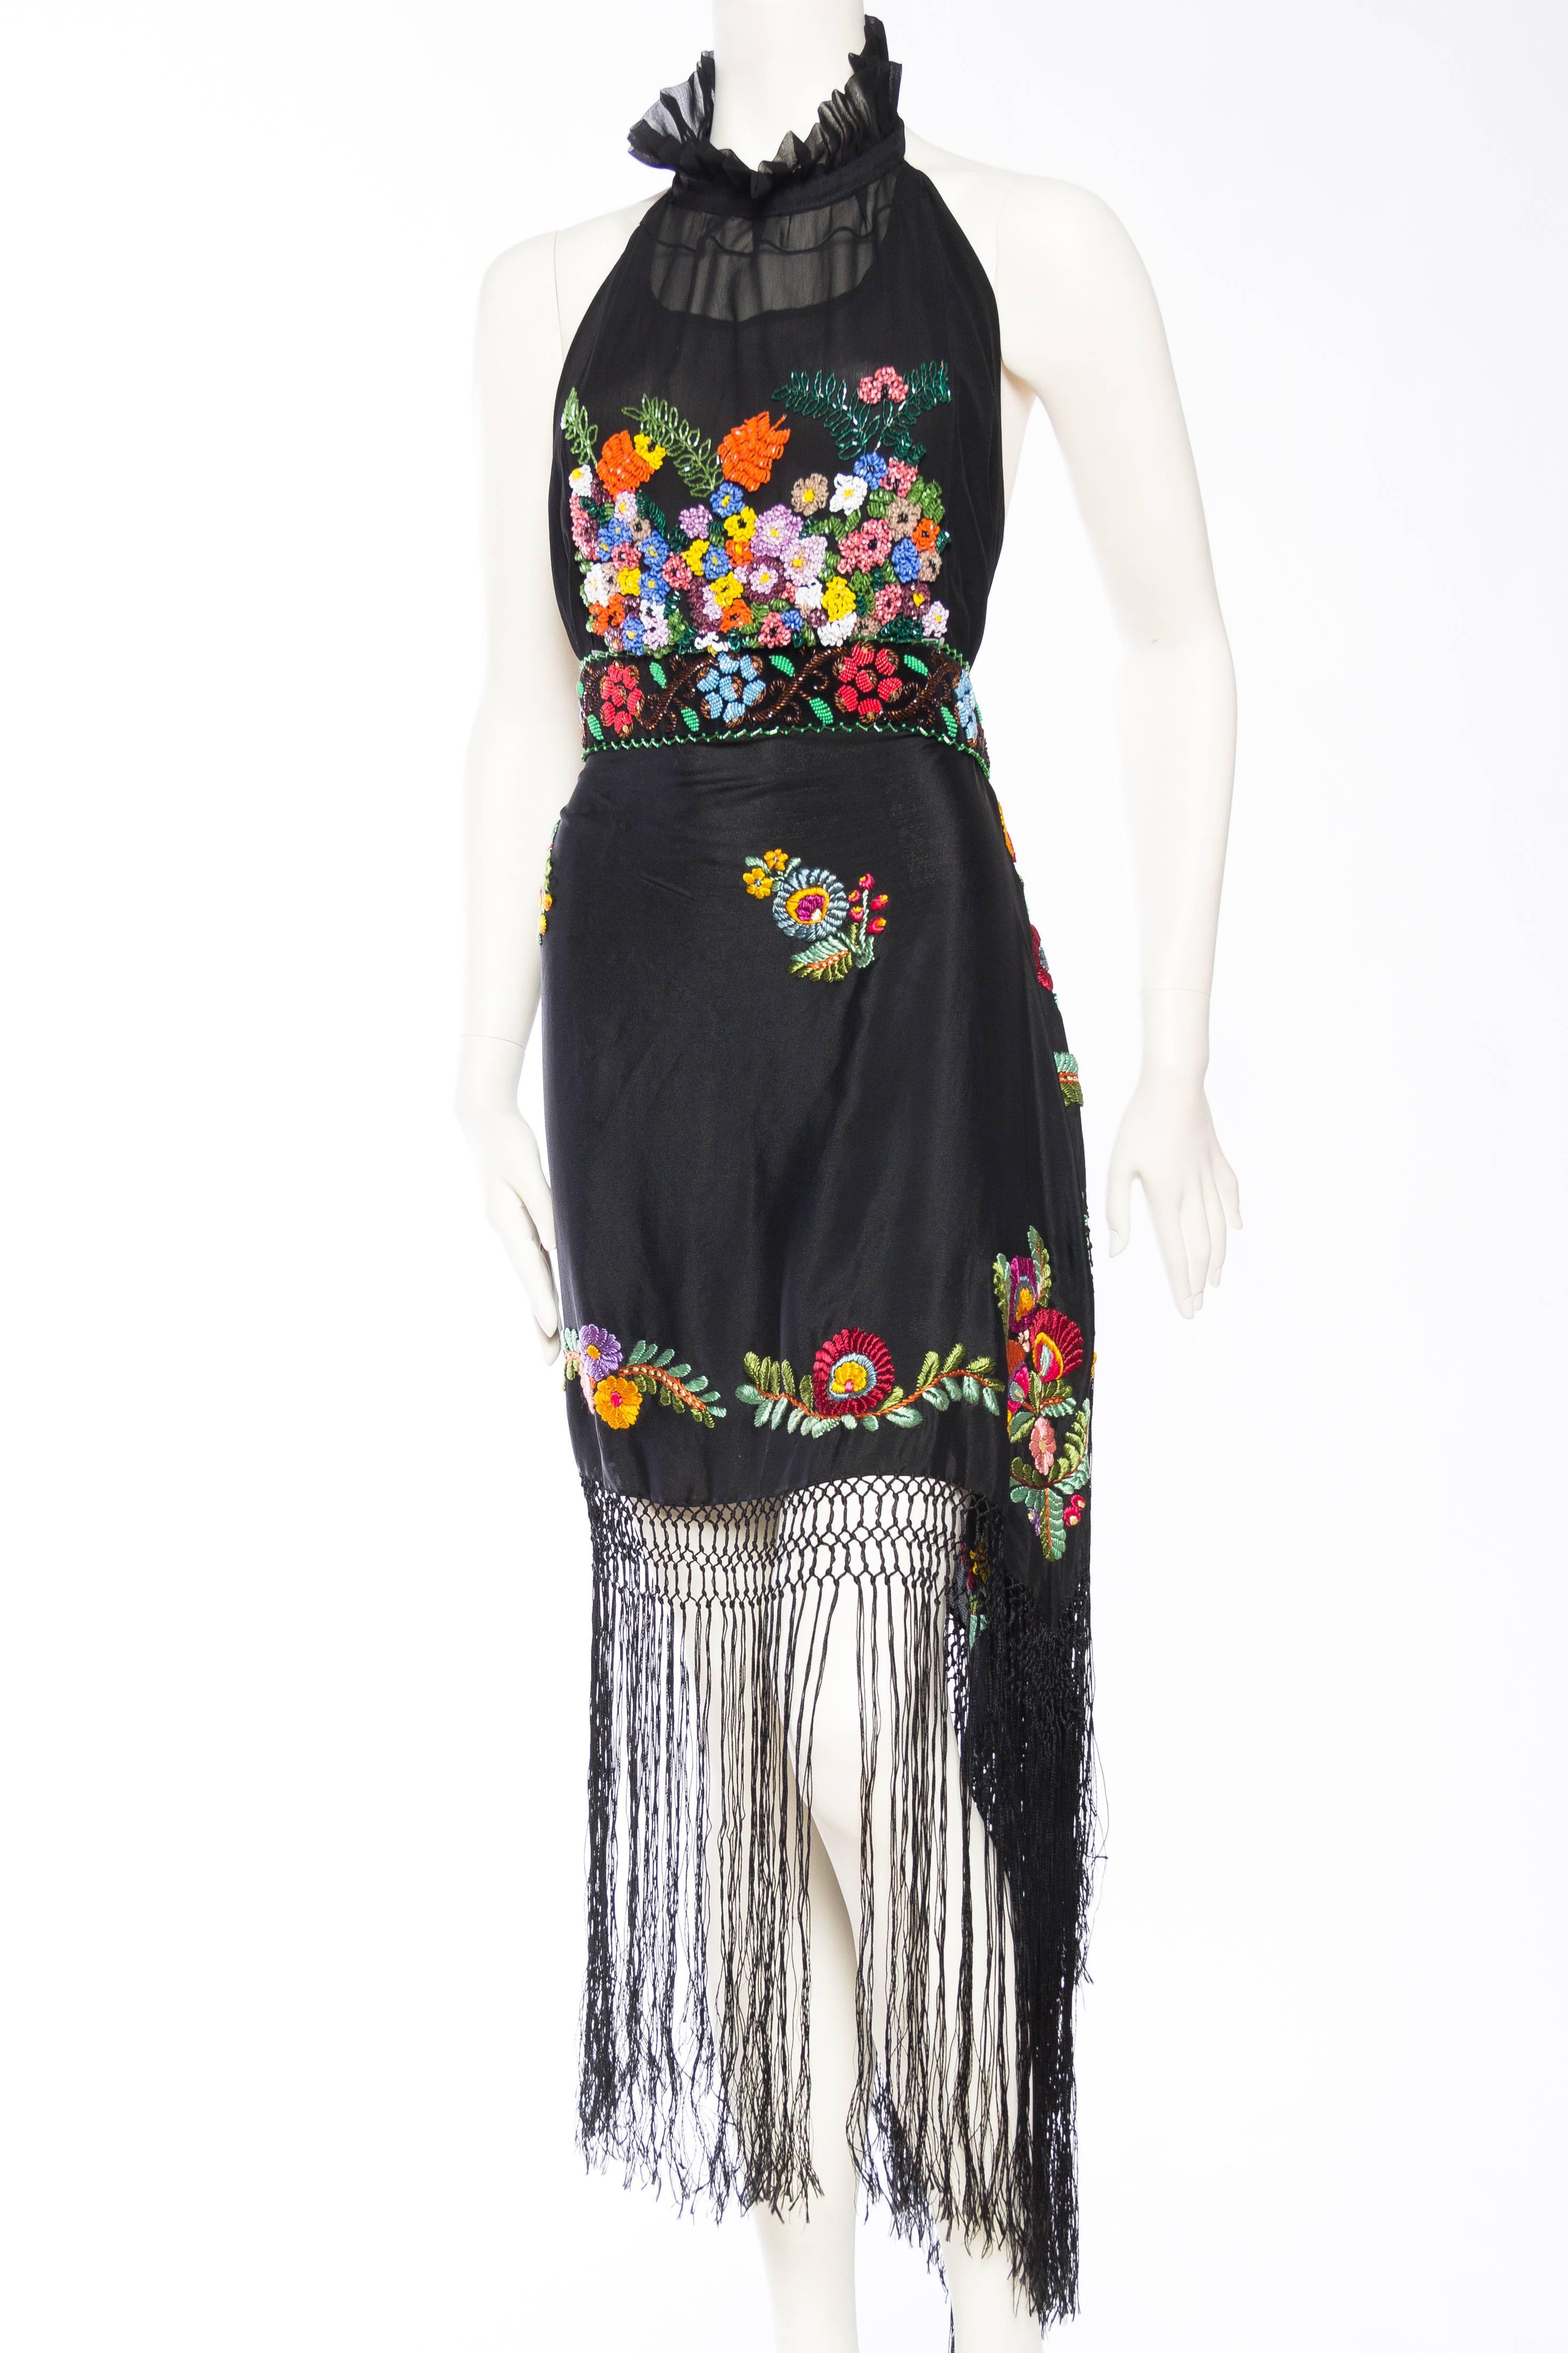 This dress is made from materials mostly dating to the 1920s. 